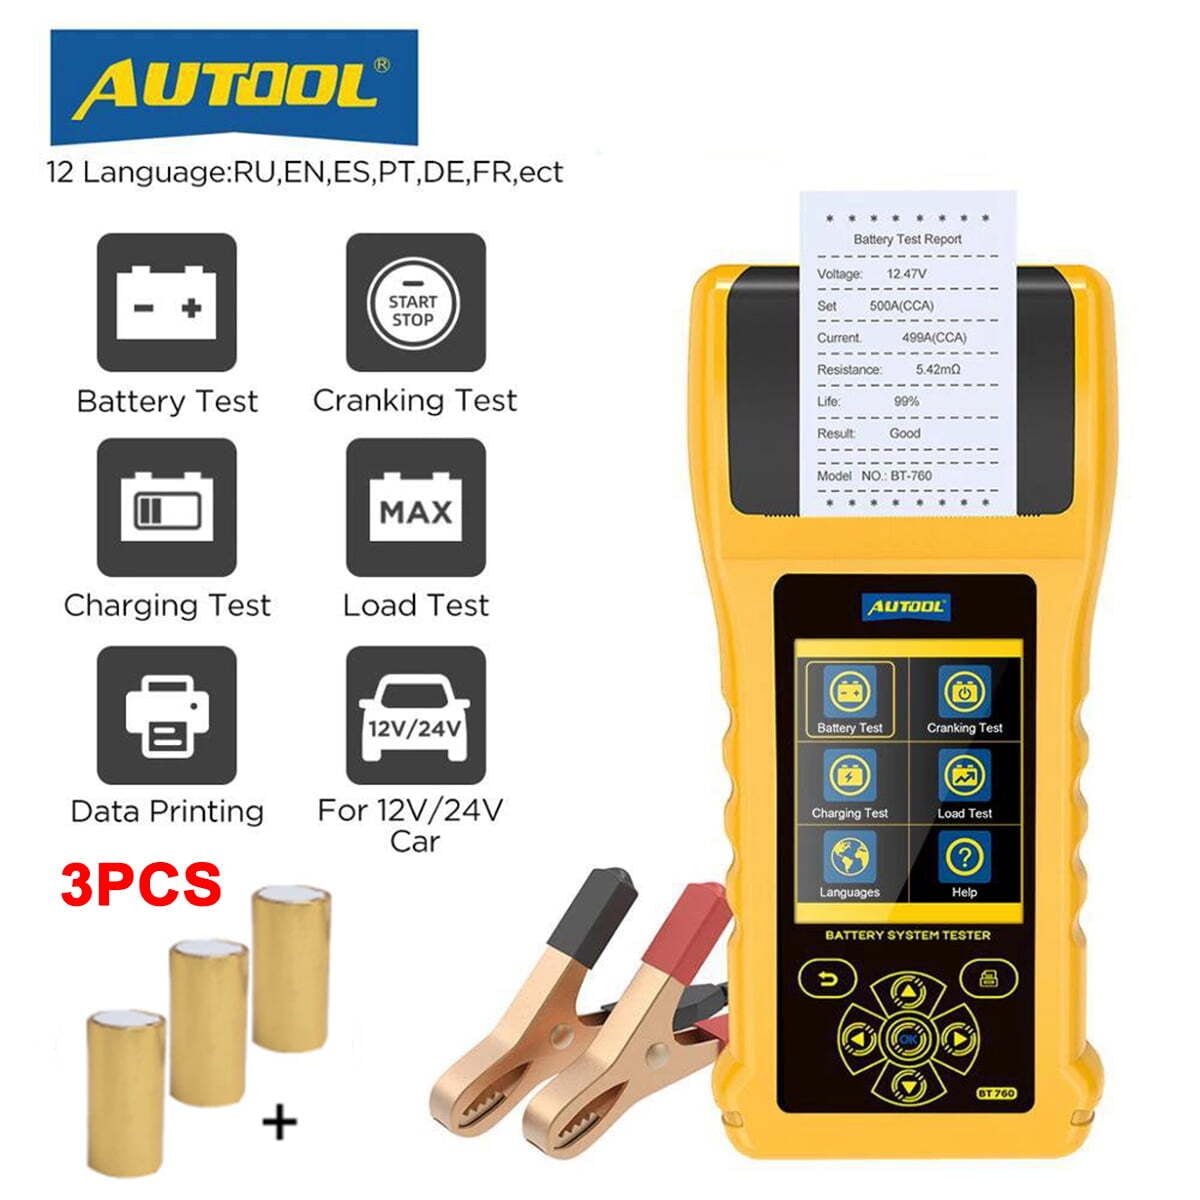 AUTOOL Automotive Battery Tester, 12V/24V Car Battery Load Tester, 6-32V  Circuit Tester for Car, Boat, Motorcycle, Built-in Thermal Printer, Free  3PCS